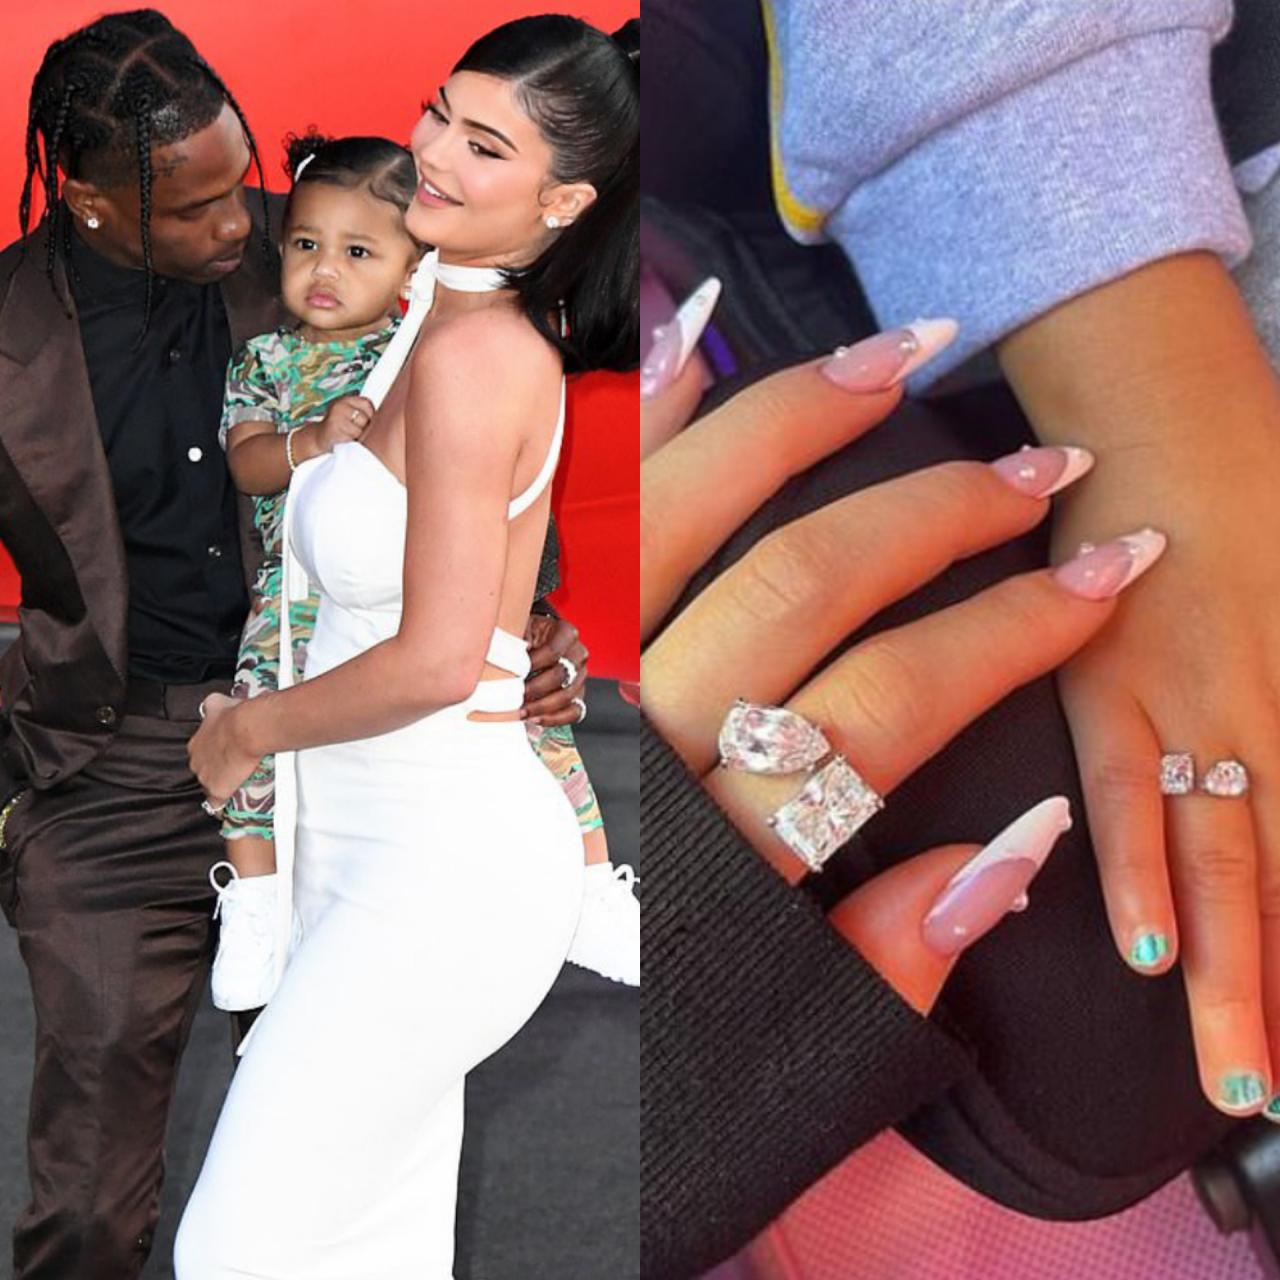 Kylie Jenner and daughter Stormi, 3, show off expensive matching diamond rings from Travis Scott (photos)